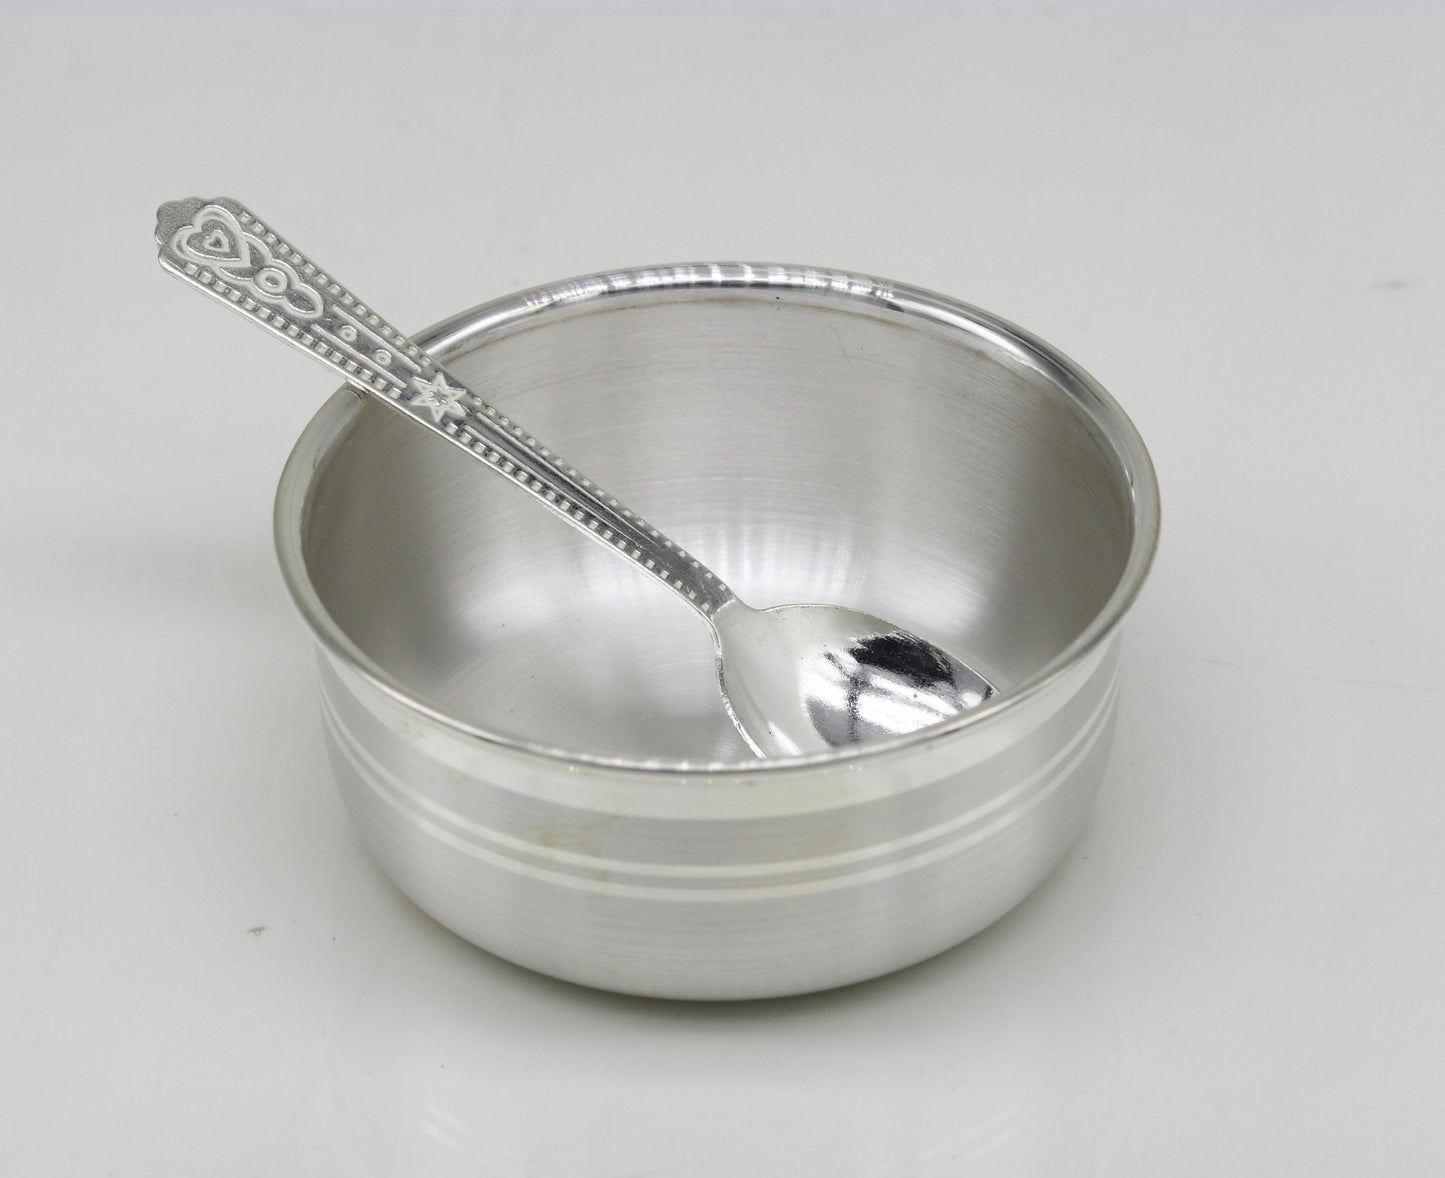 999 pure fine silver handmade silver bowl and spoon set, kitchen and dining utensils stay baby/kids healthy, silver puja utensils sv177 - TRIBAL ORNAMENTS